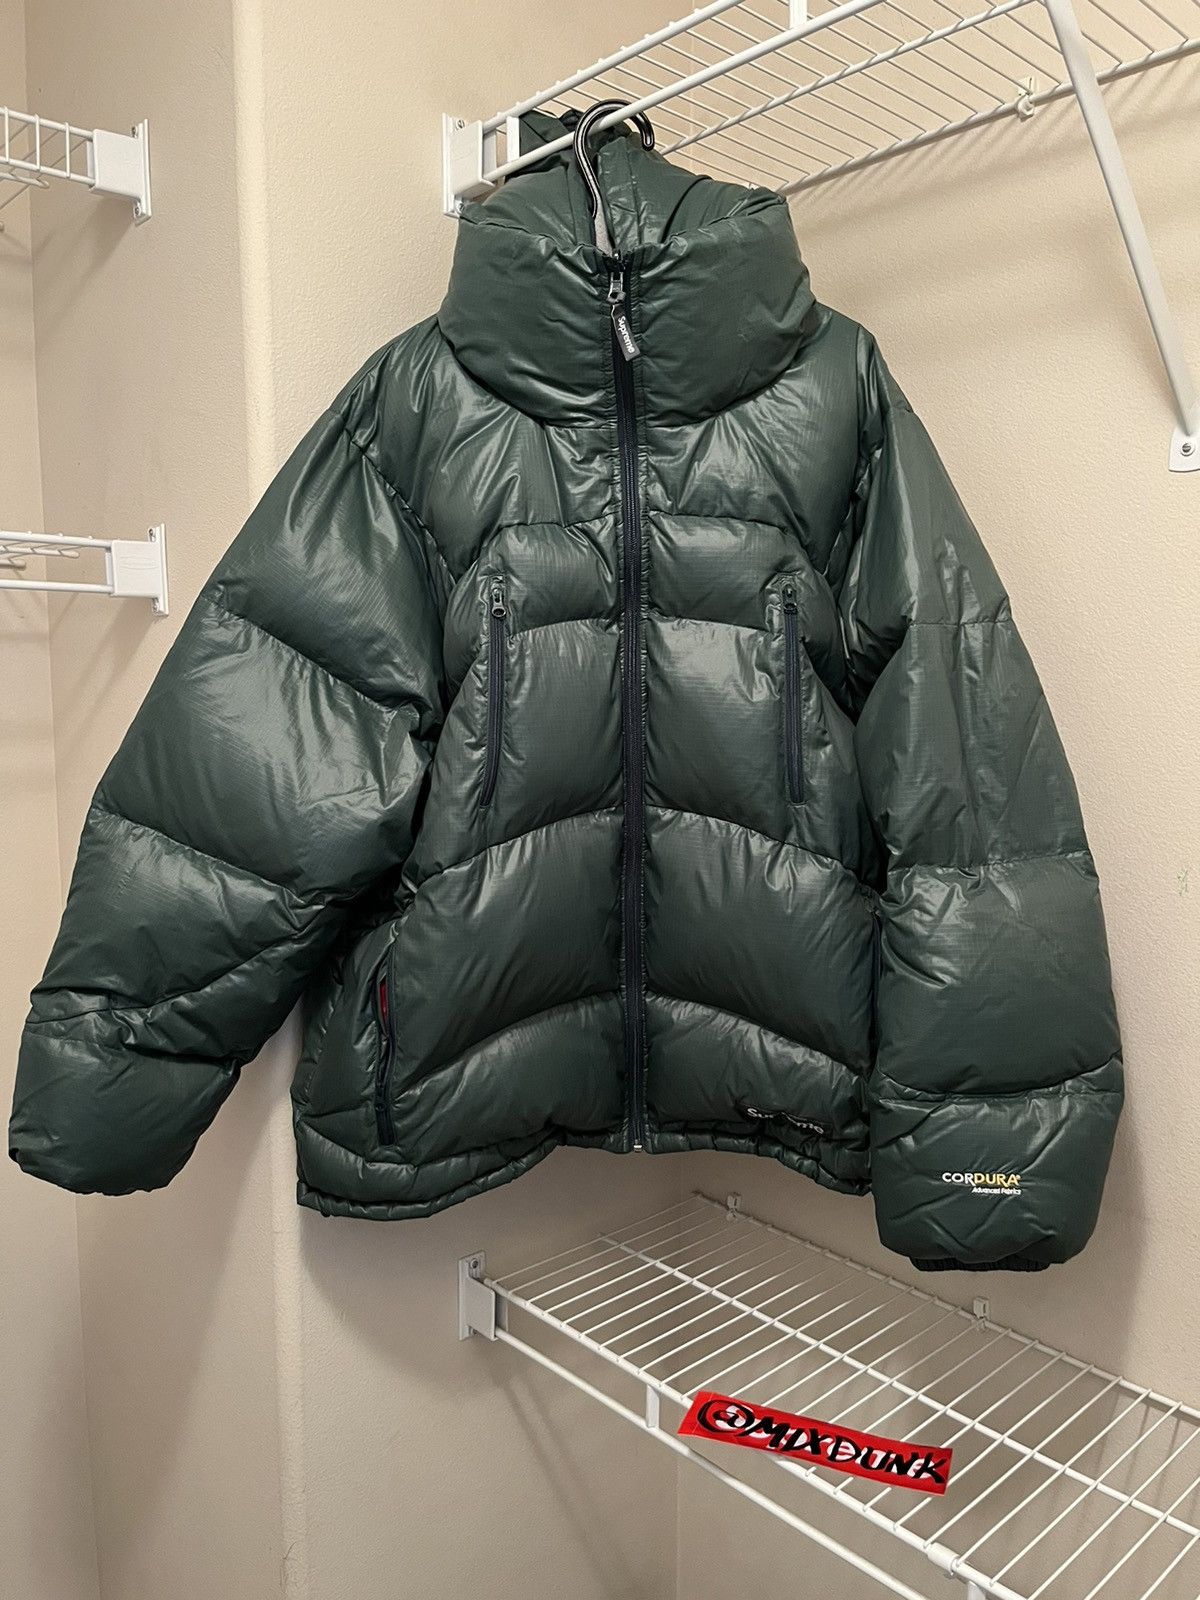 Supreme Featherweight Down Jacket | Grailed